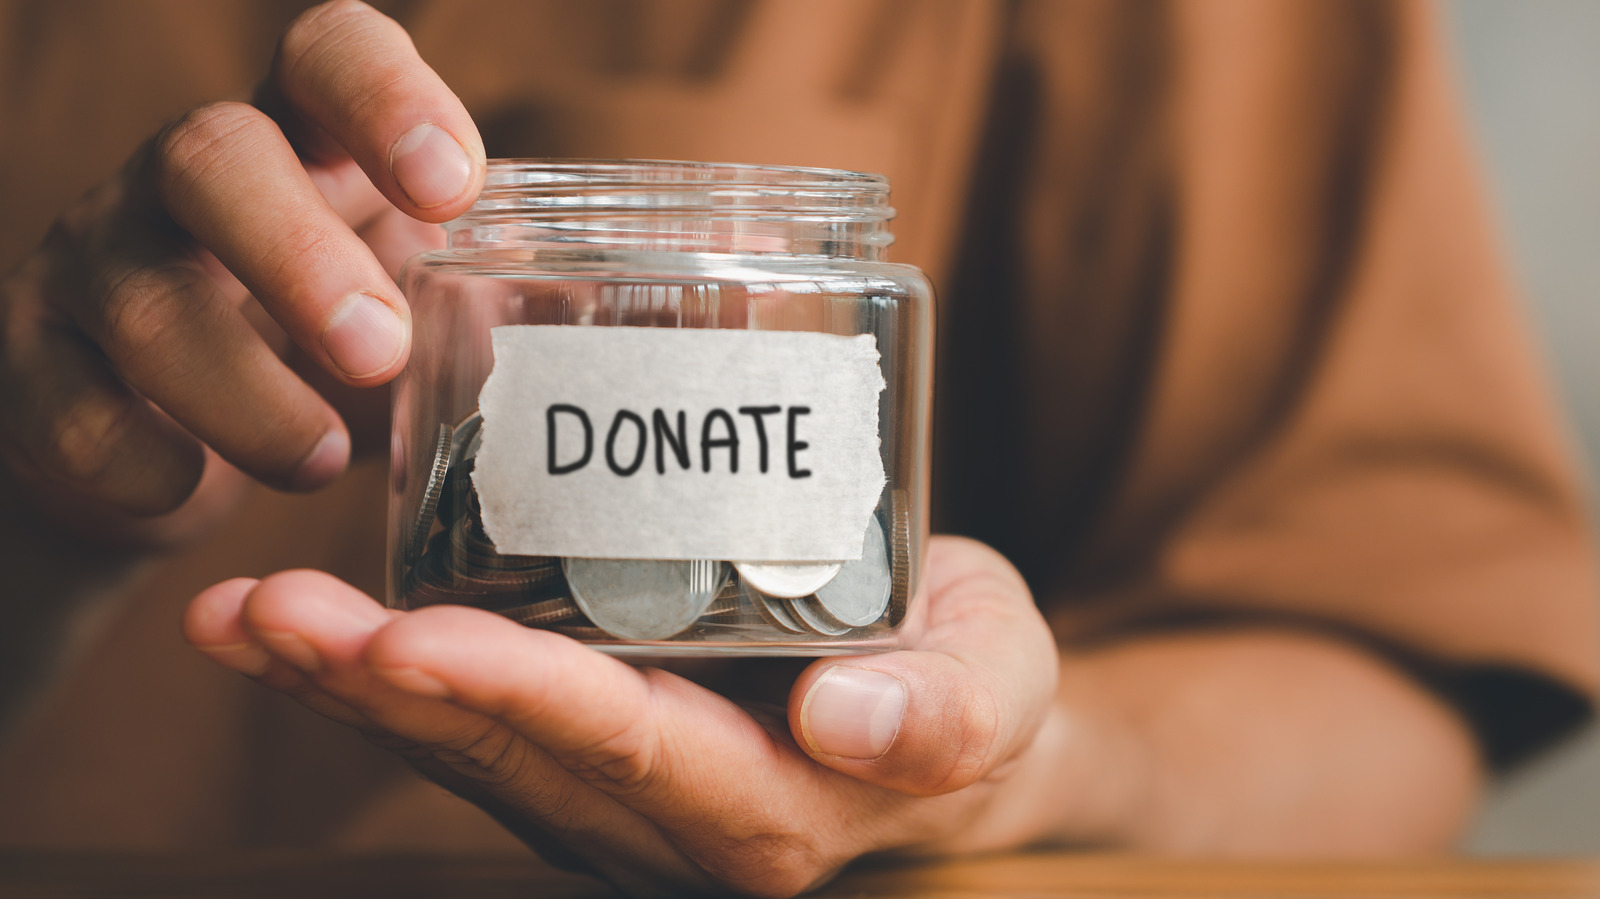 Tips For Ensuring Any Donations To Charity Are Actually Going To The Right Place